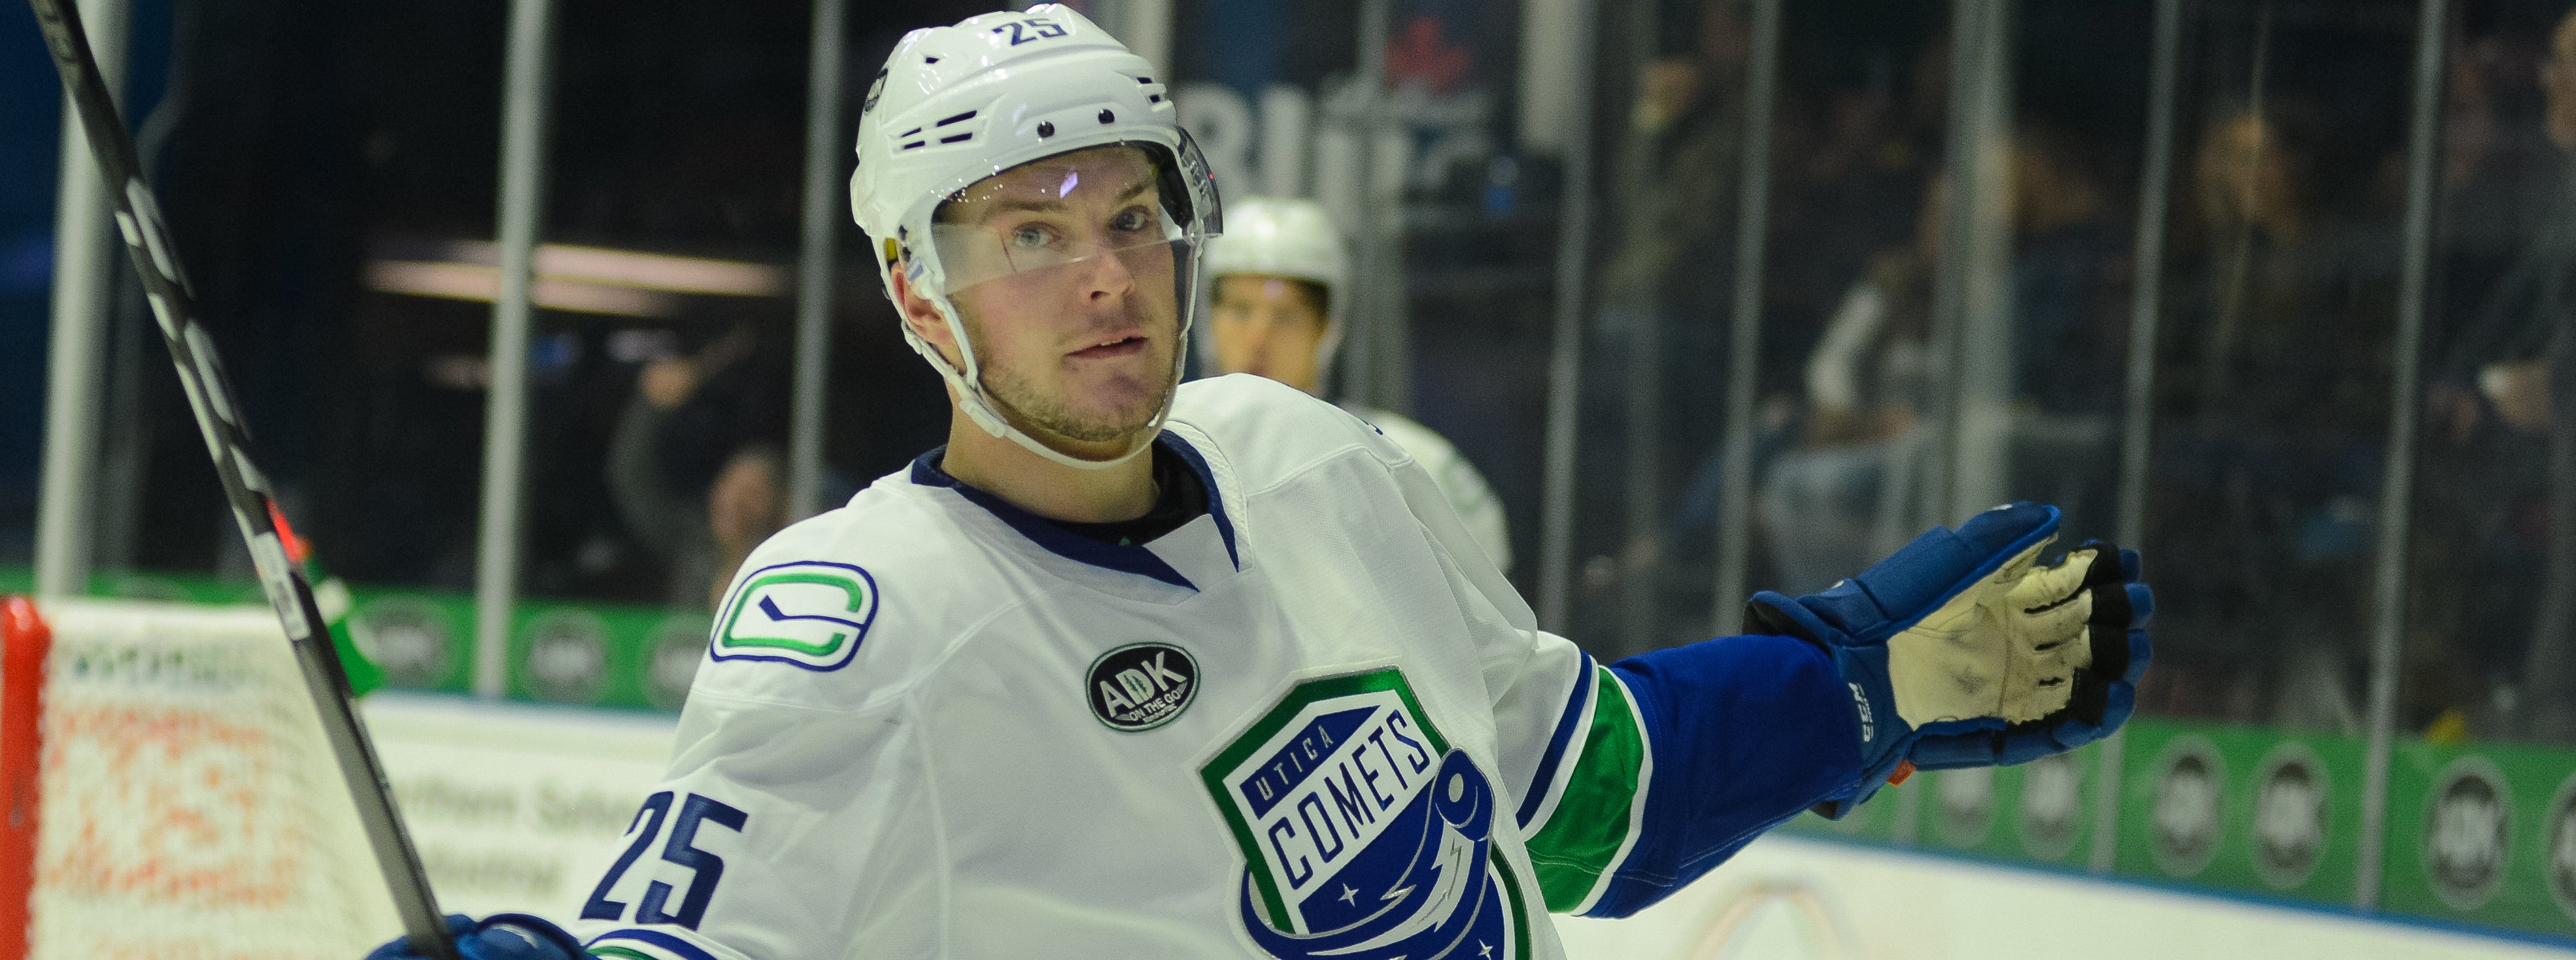 RAFFERTY NAMED CCM/AHL ROOKIE OF THE MONTH